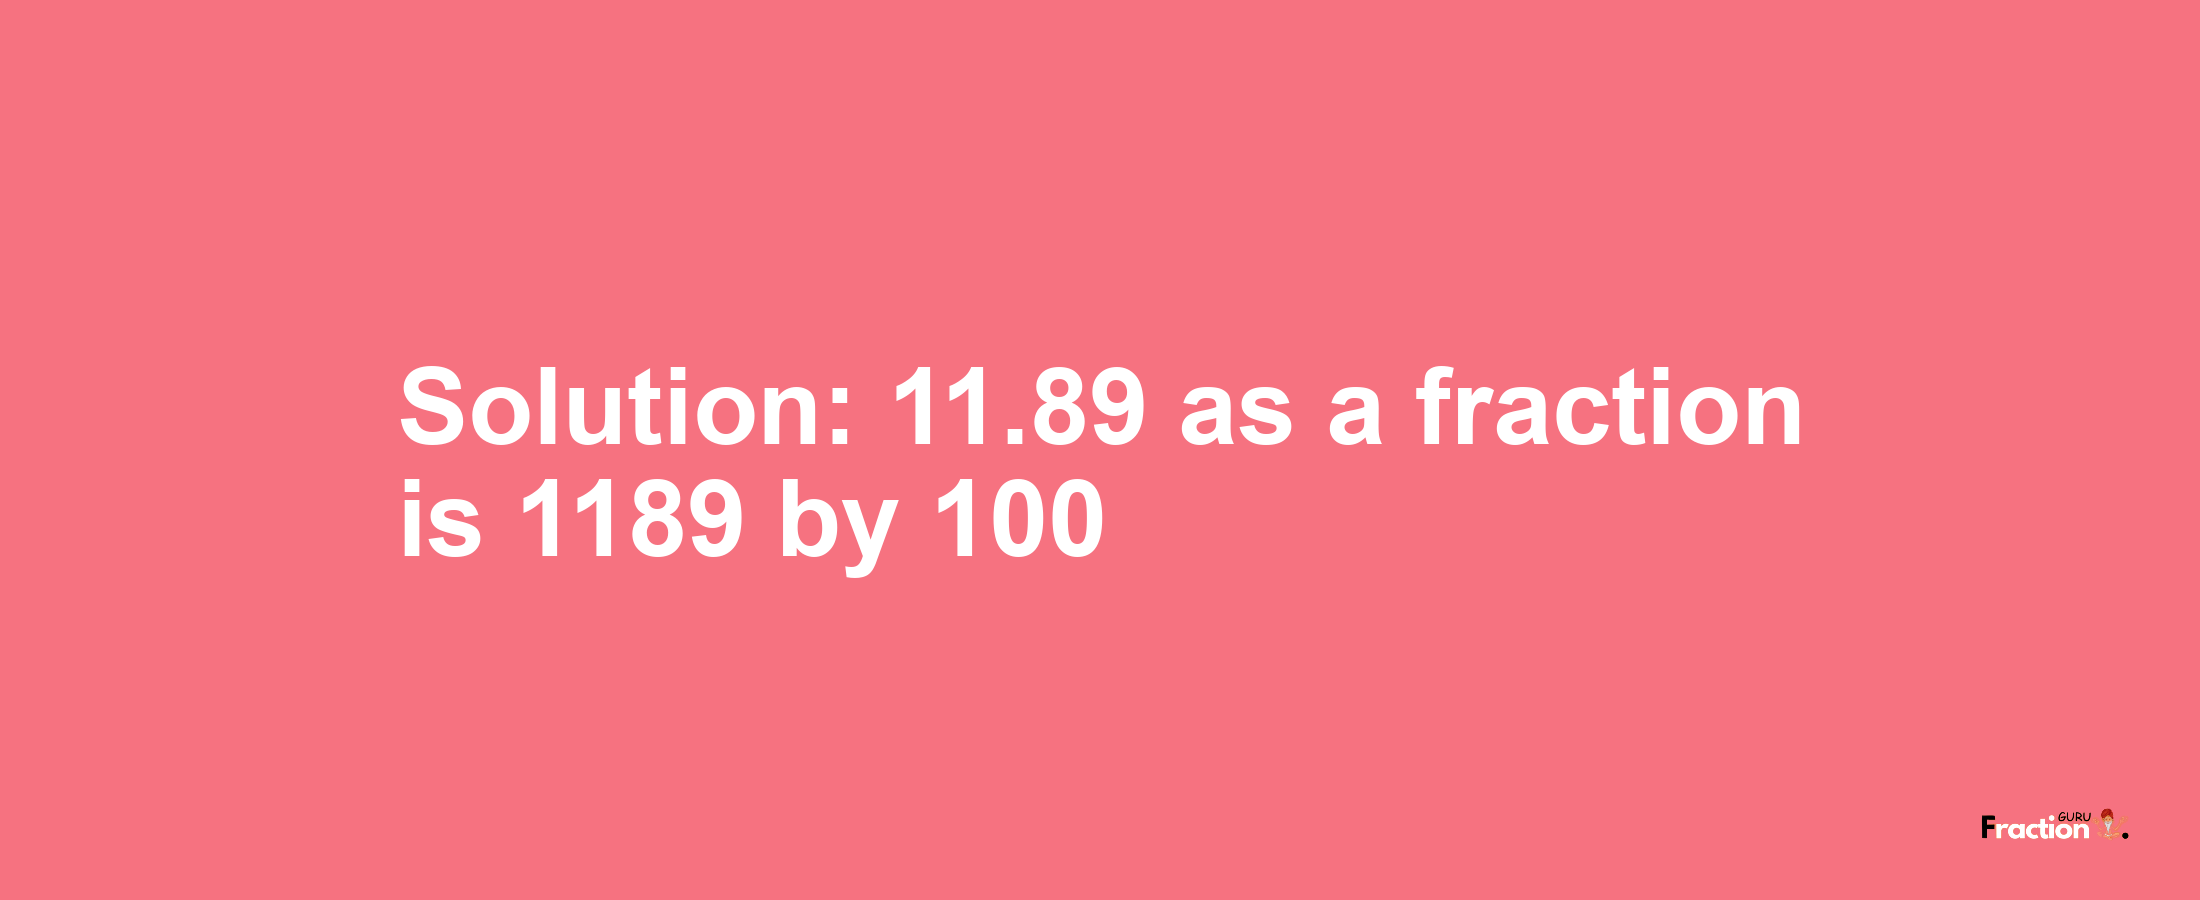 Solution:11.89 as a fraction is 1189/100